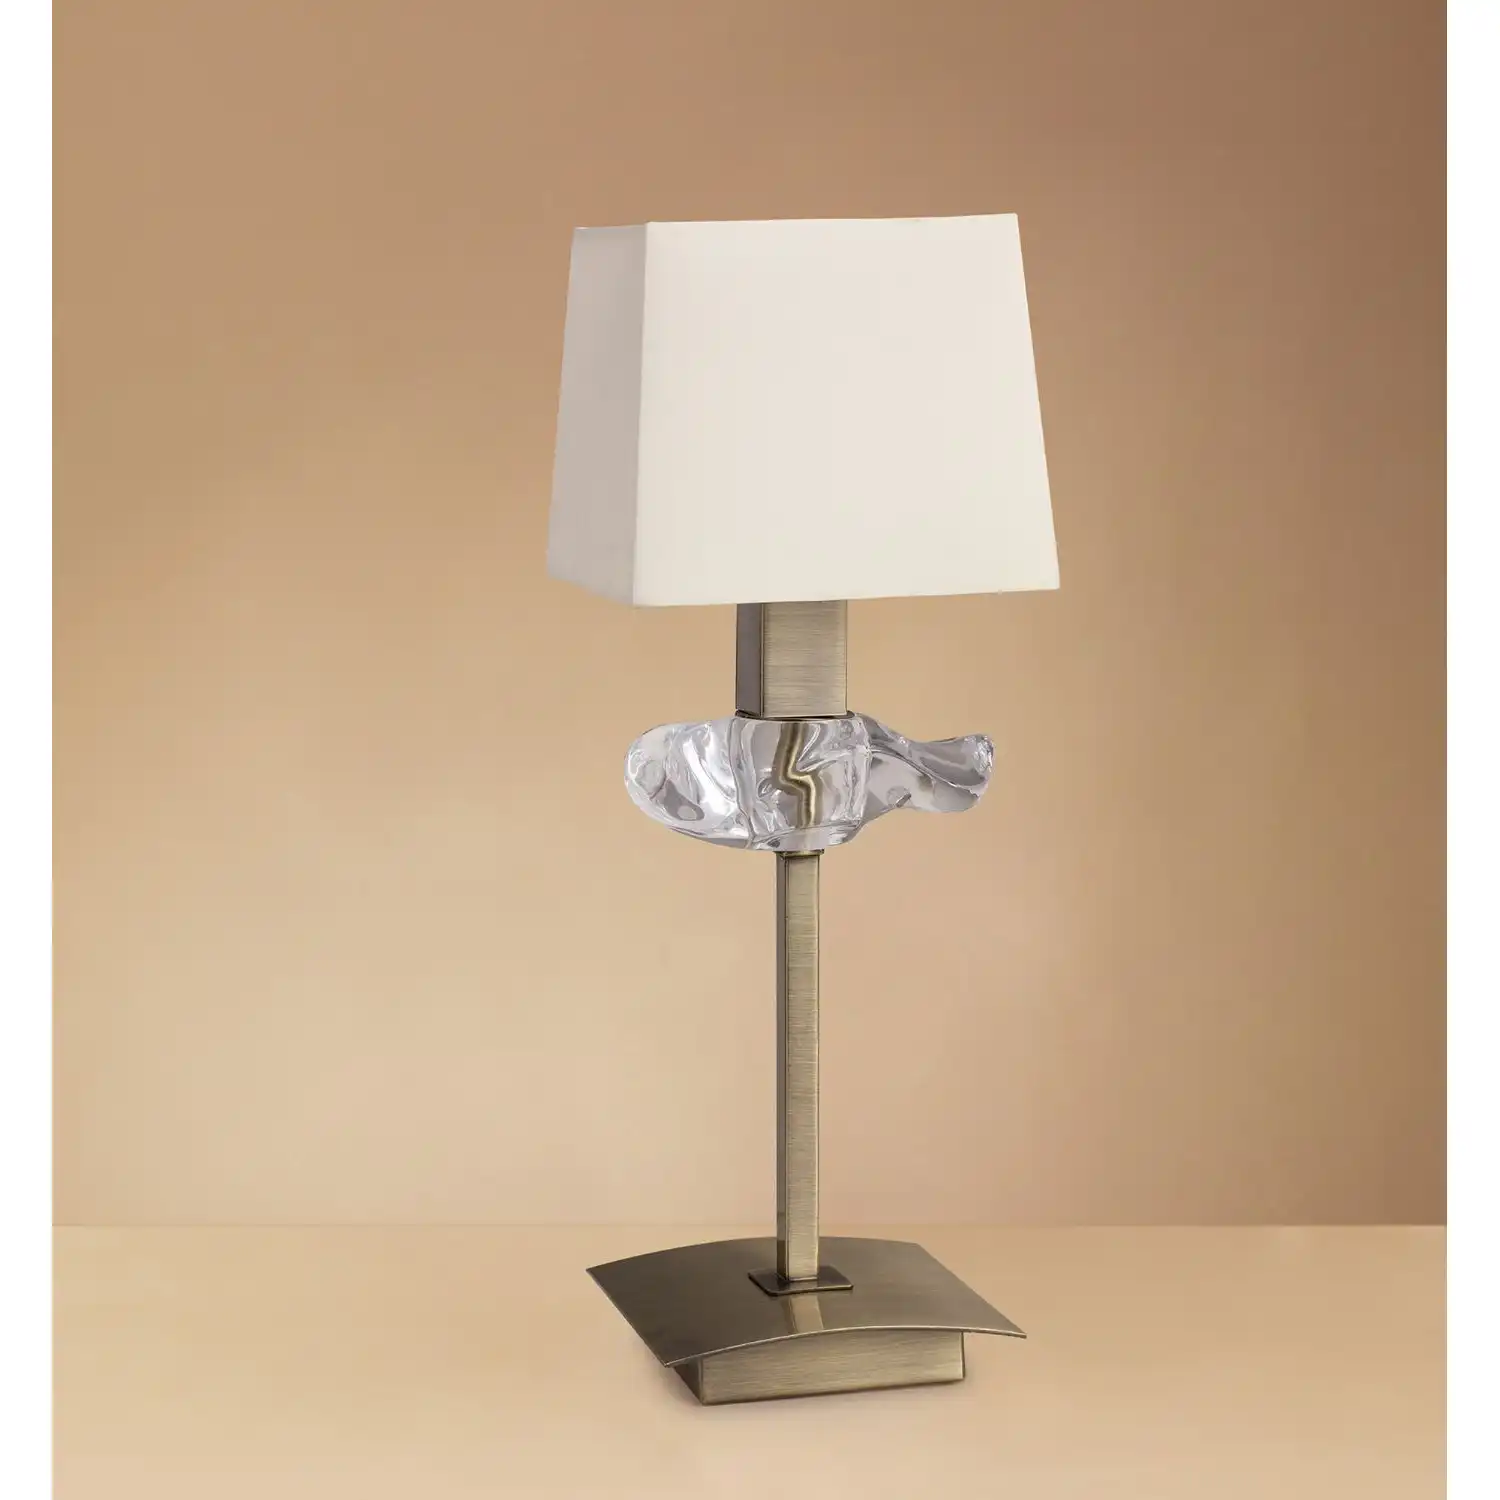 Akira Table Lamp 1 Light E14, Antique Brass With Cream Shade